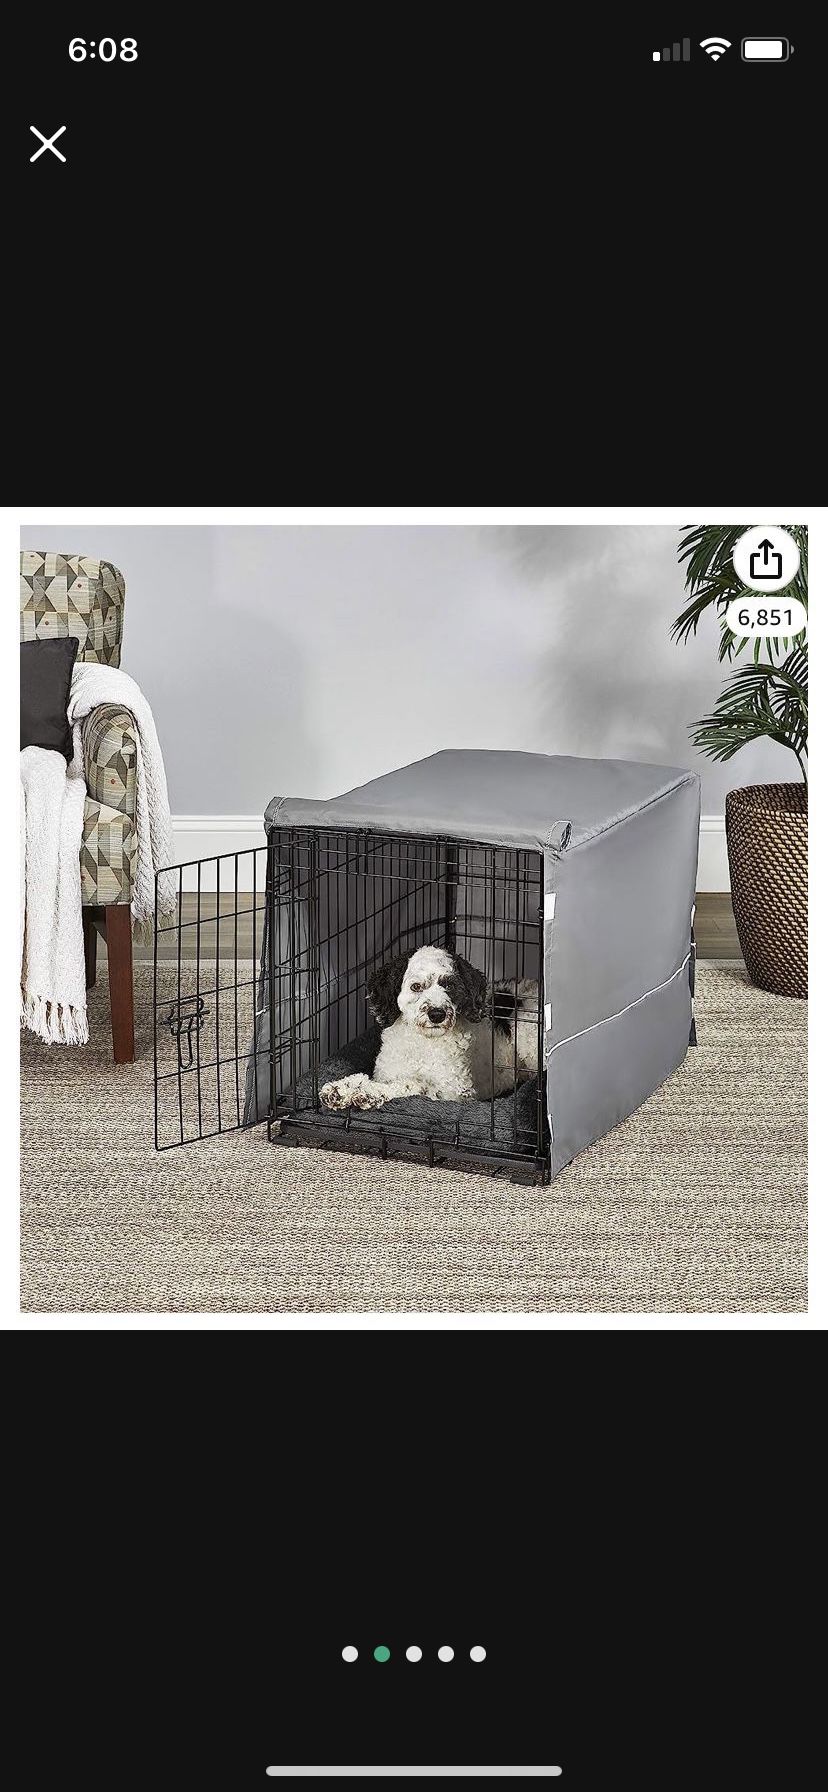 New World Double Door Dog Cage Pet Crate Kit Includes One Two-Door Crate, Matching Gray Bed &Gray Crate Cover